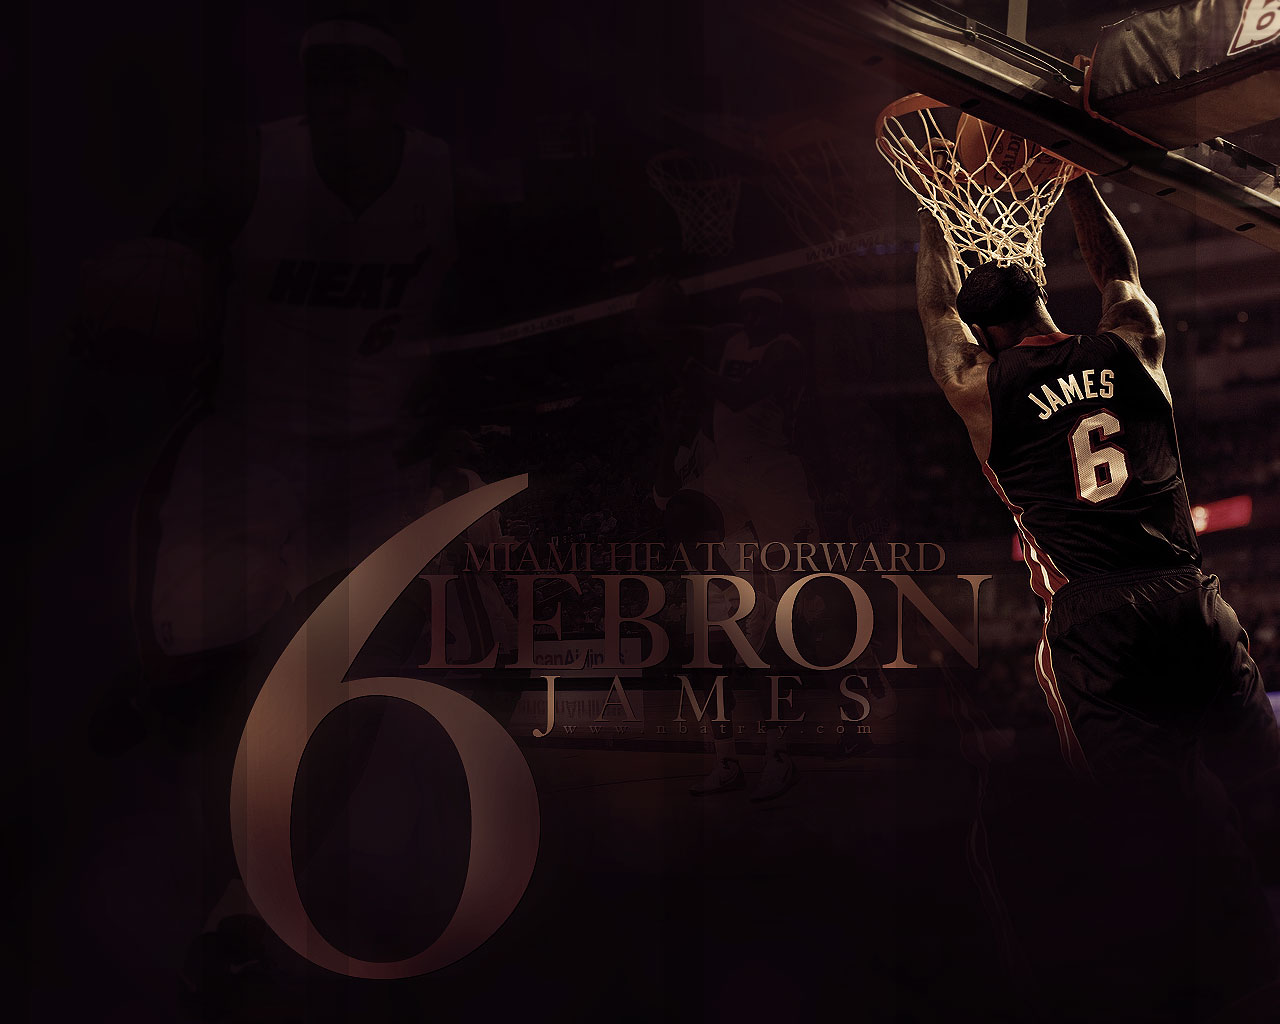 Second Is Wallpaper Of Lebron James Again P This Time Made